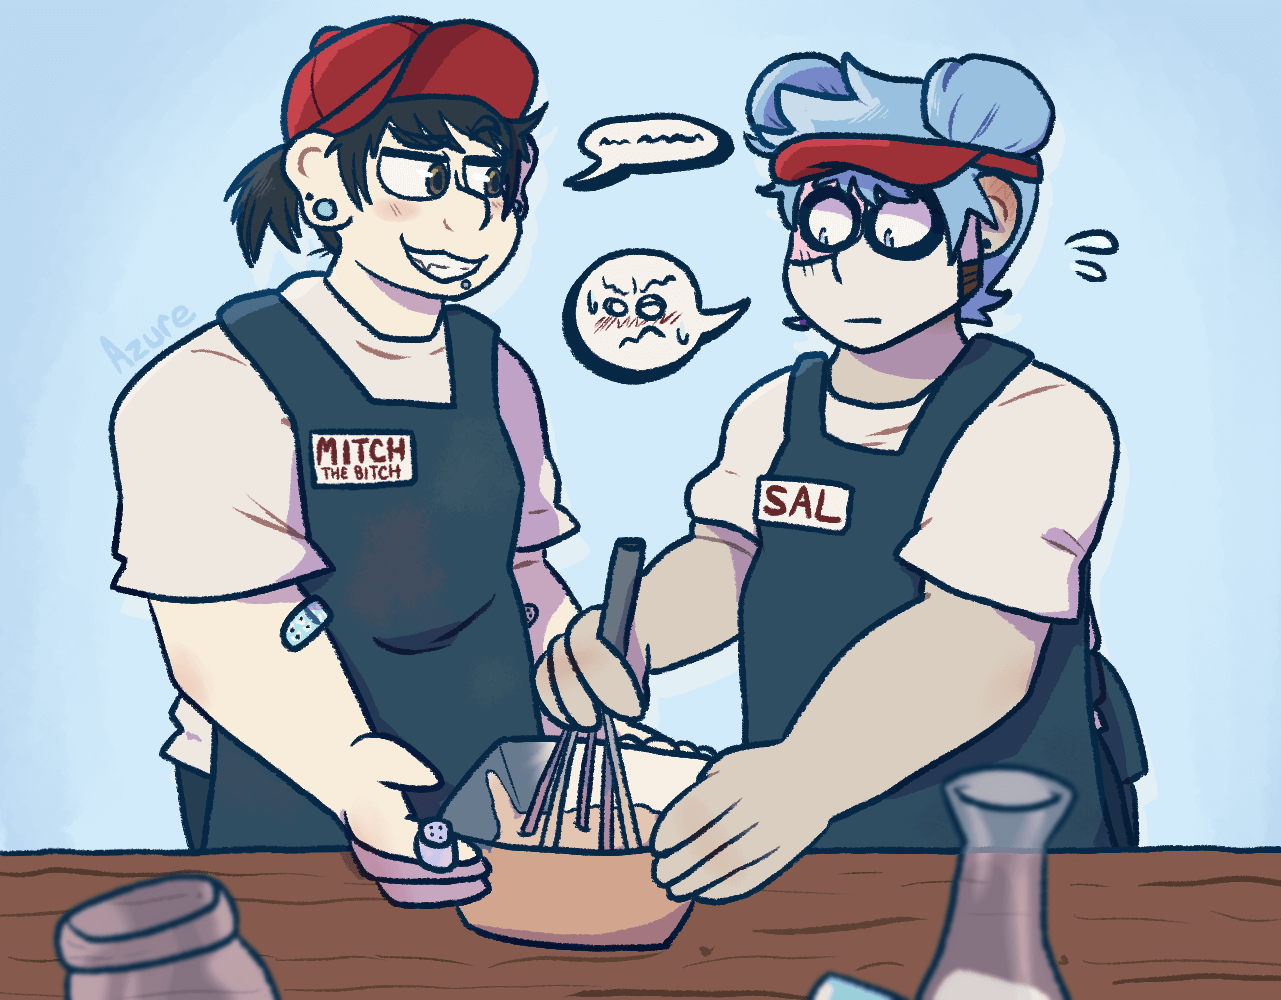 Sally Face AU fanart of an OC and Sal working to mix badder together, with the OC flirting with Sal, who is flusteredly trying to focus on the task at hand.